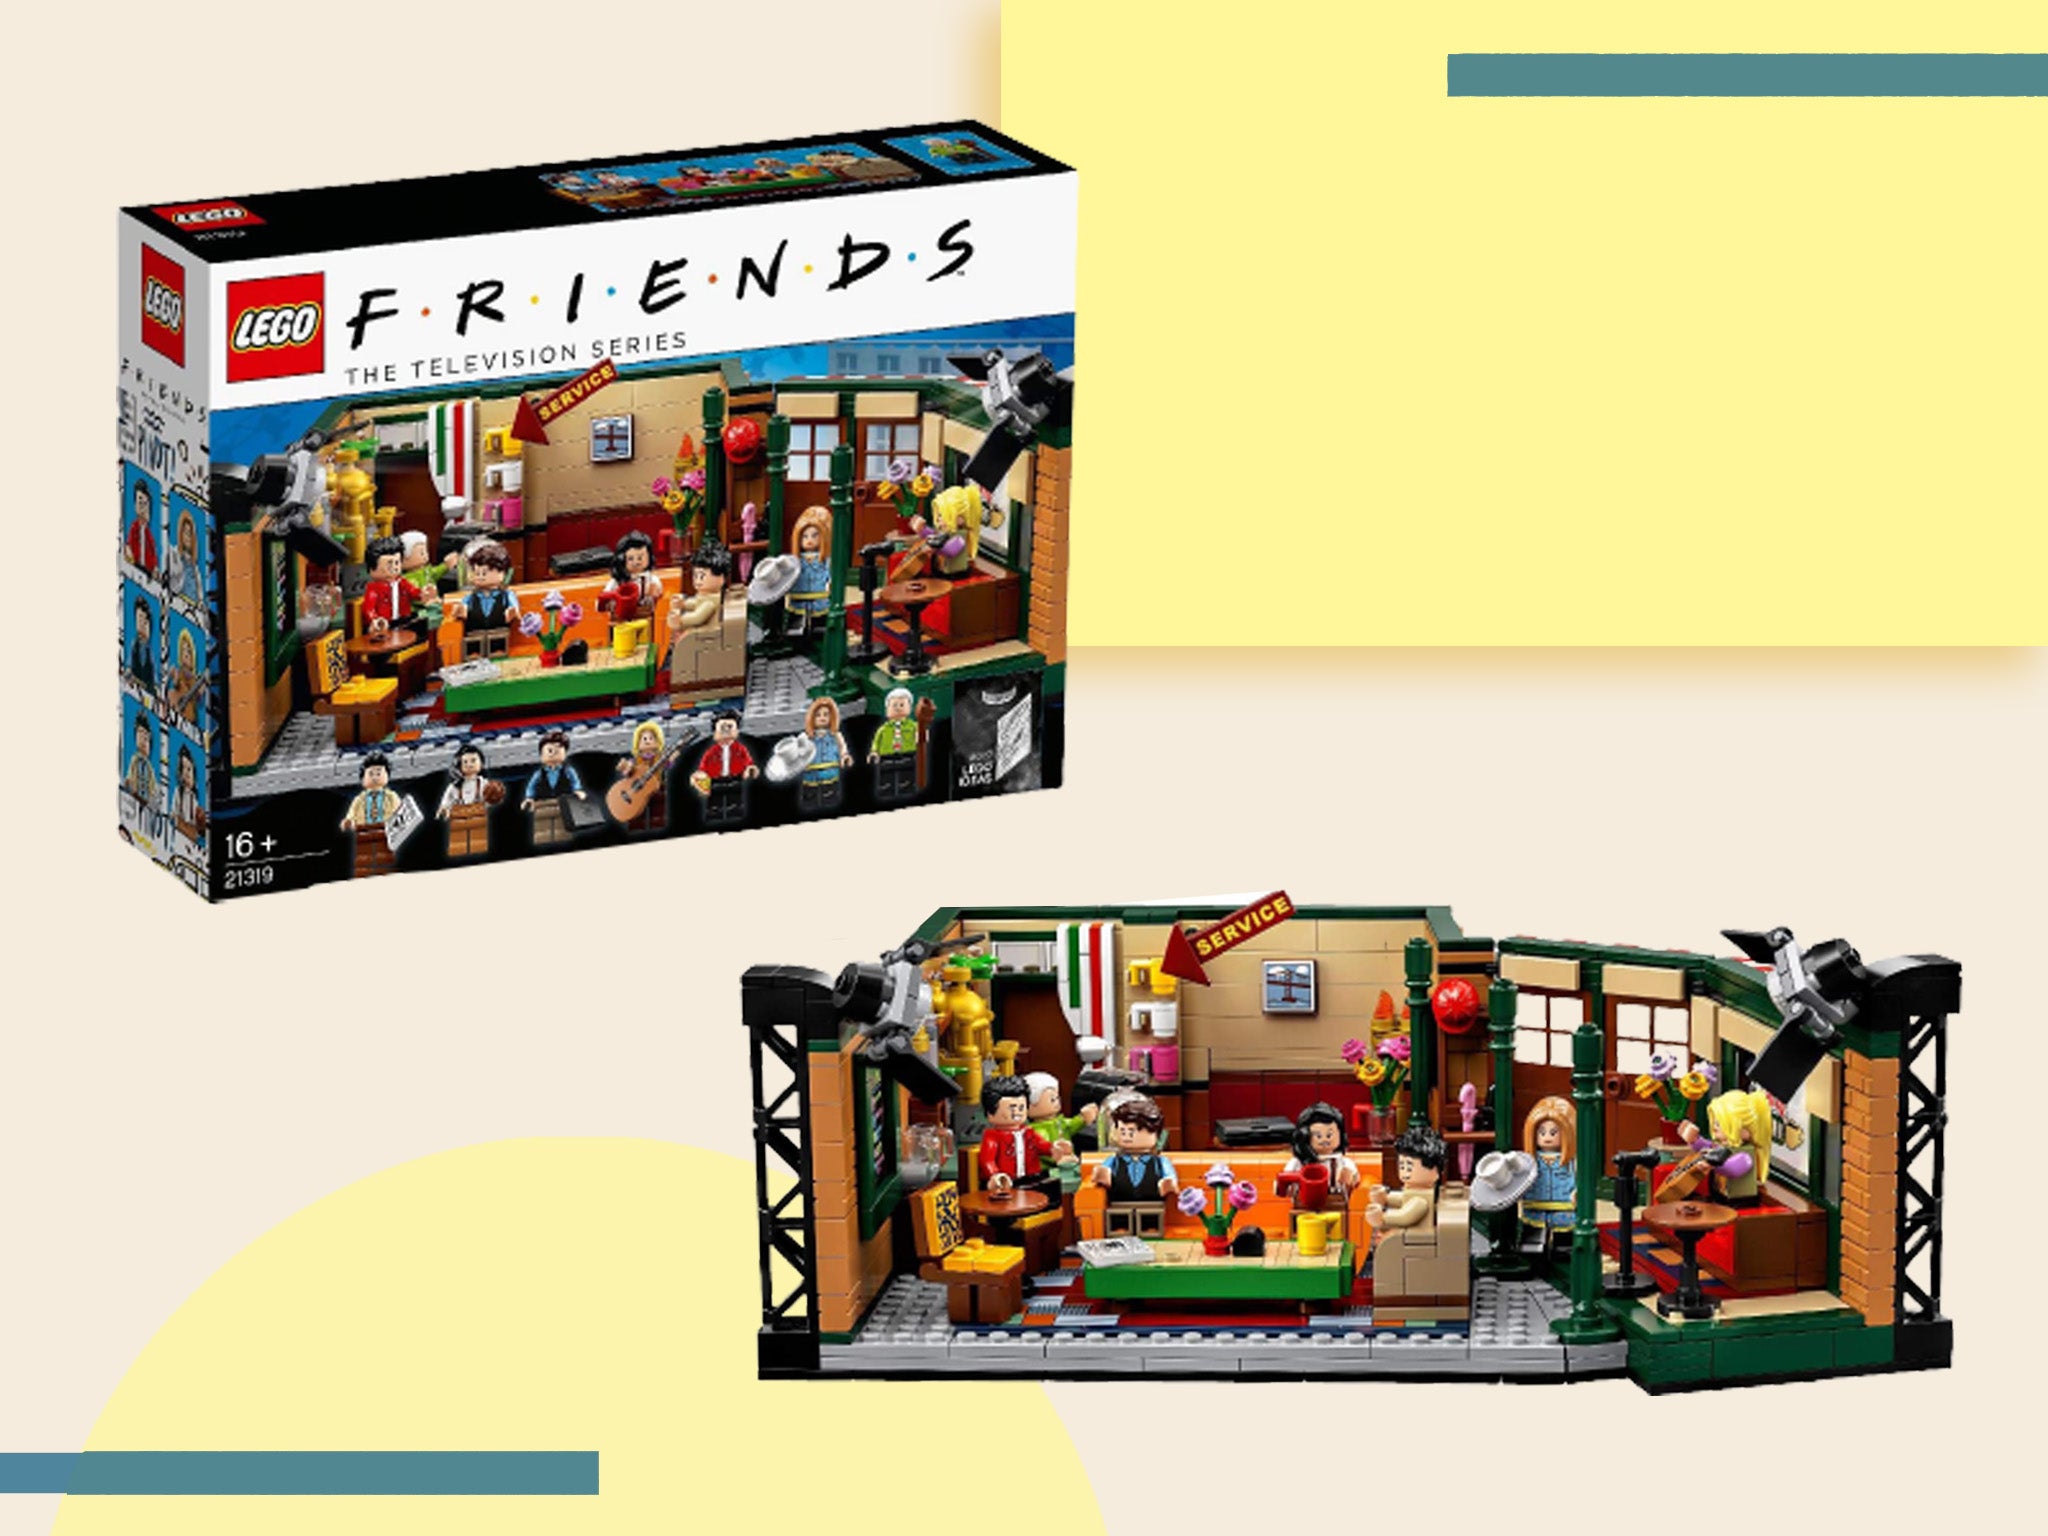 Prime 'Friends' Lego set 2021: Save 25% in Amazon's sale | The Independent